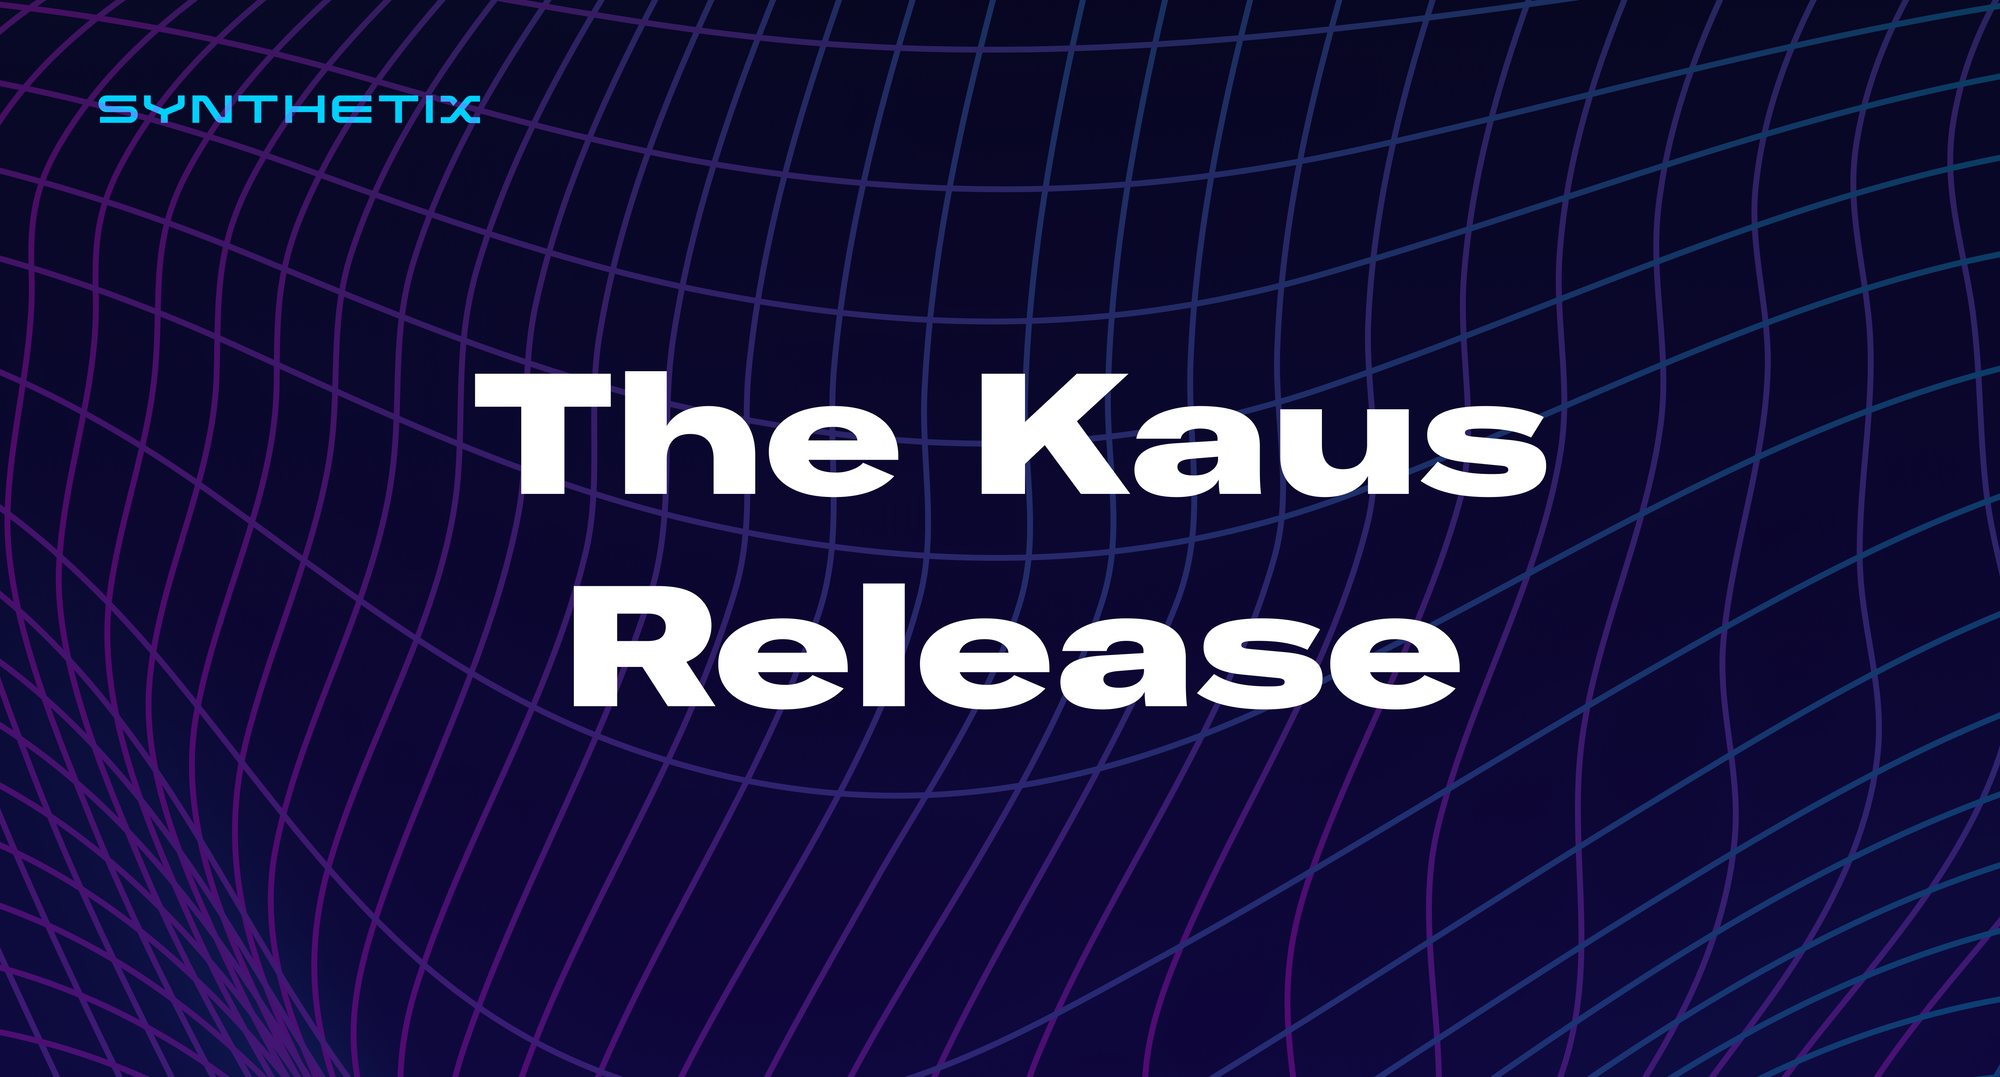 The Kaus Release